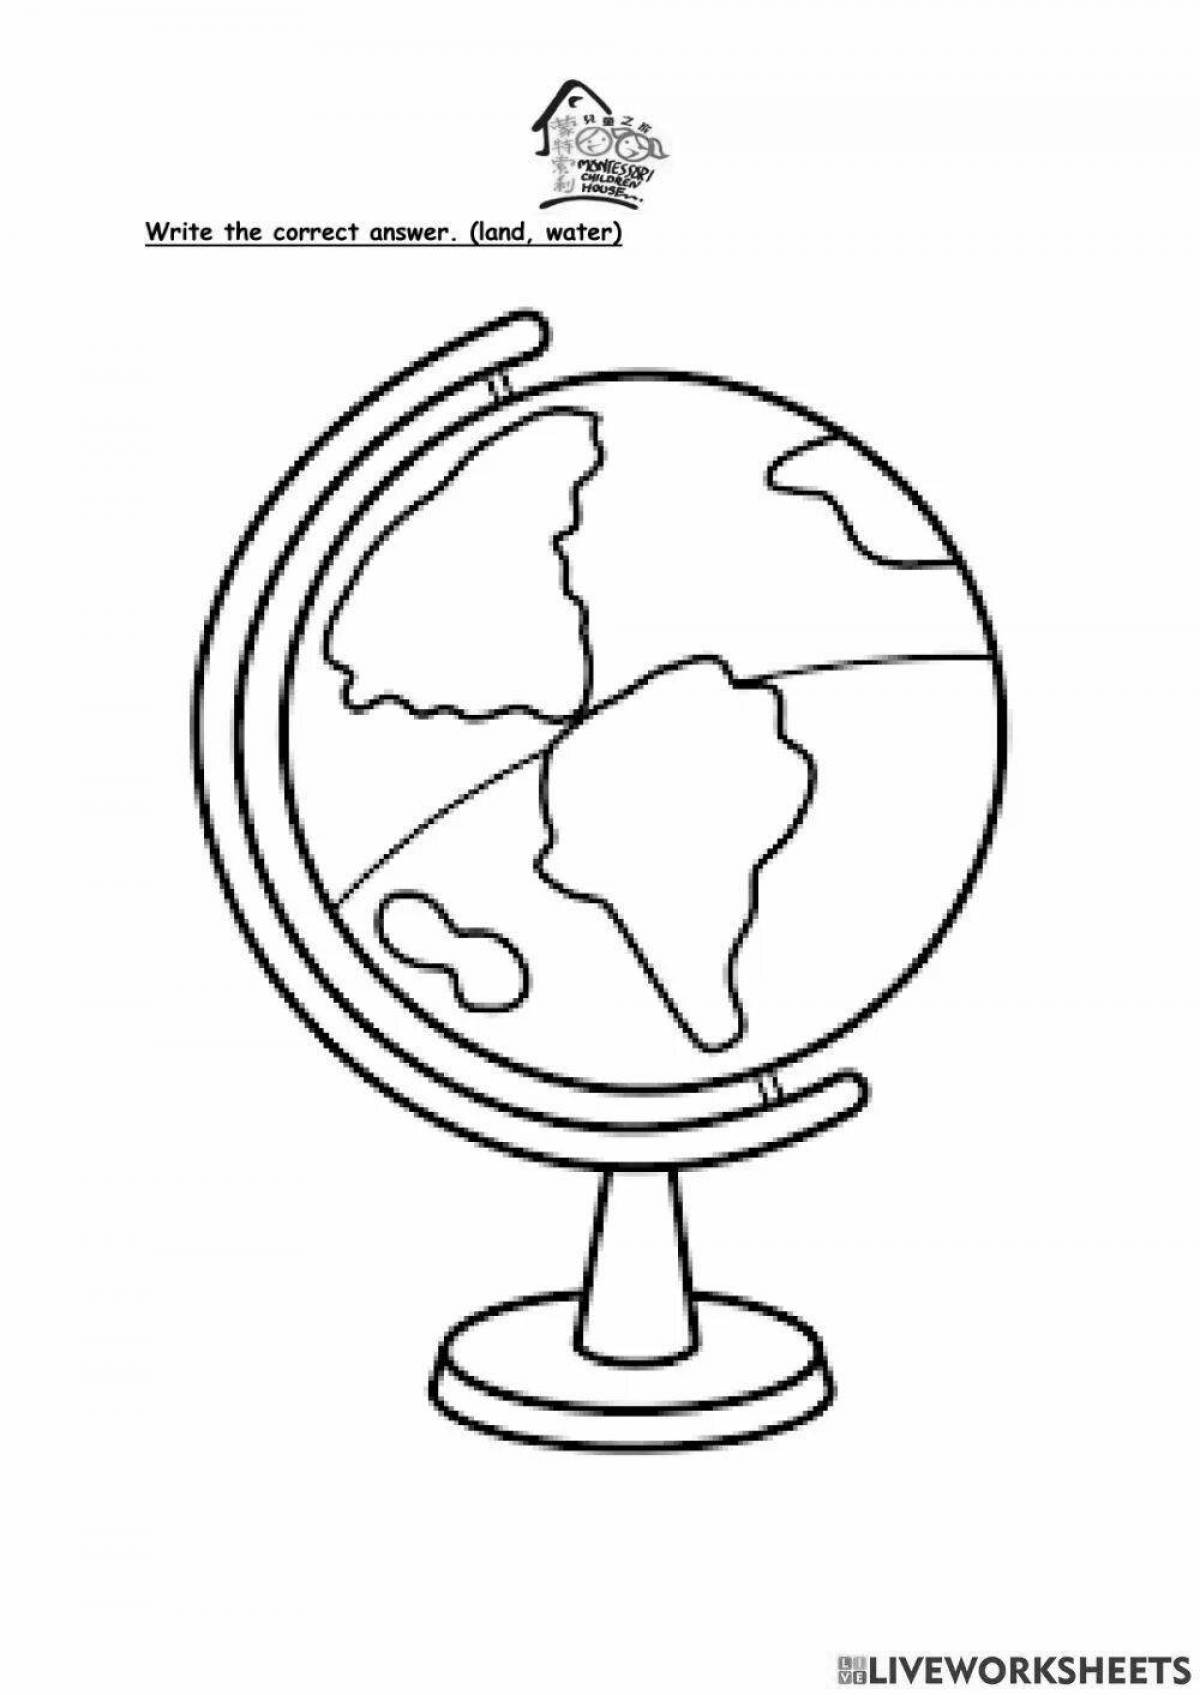 Colorful globe coloring book for kids